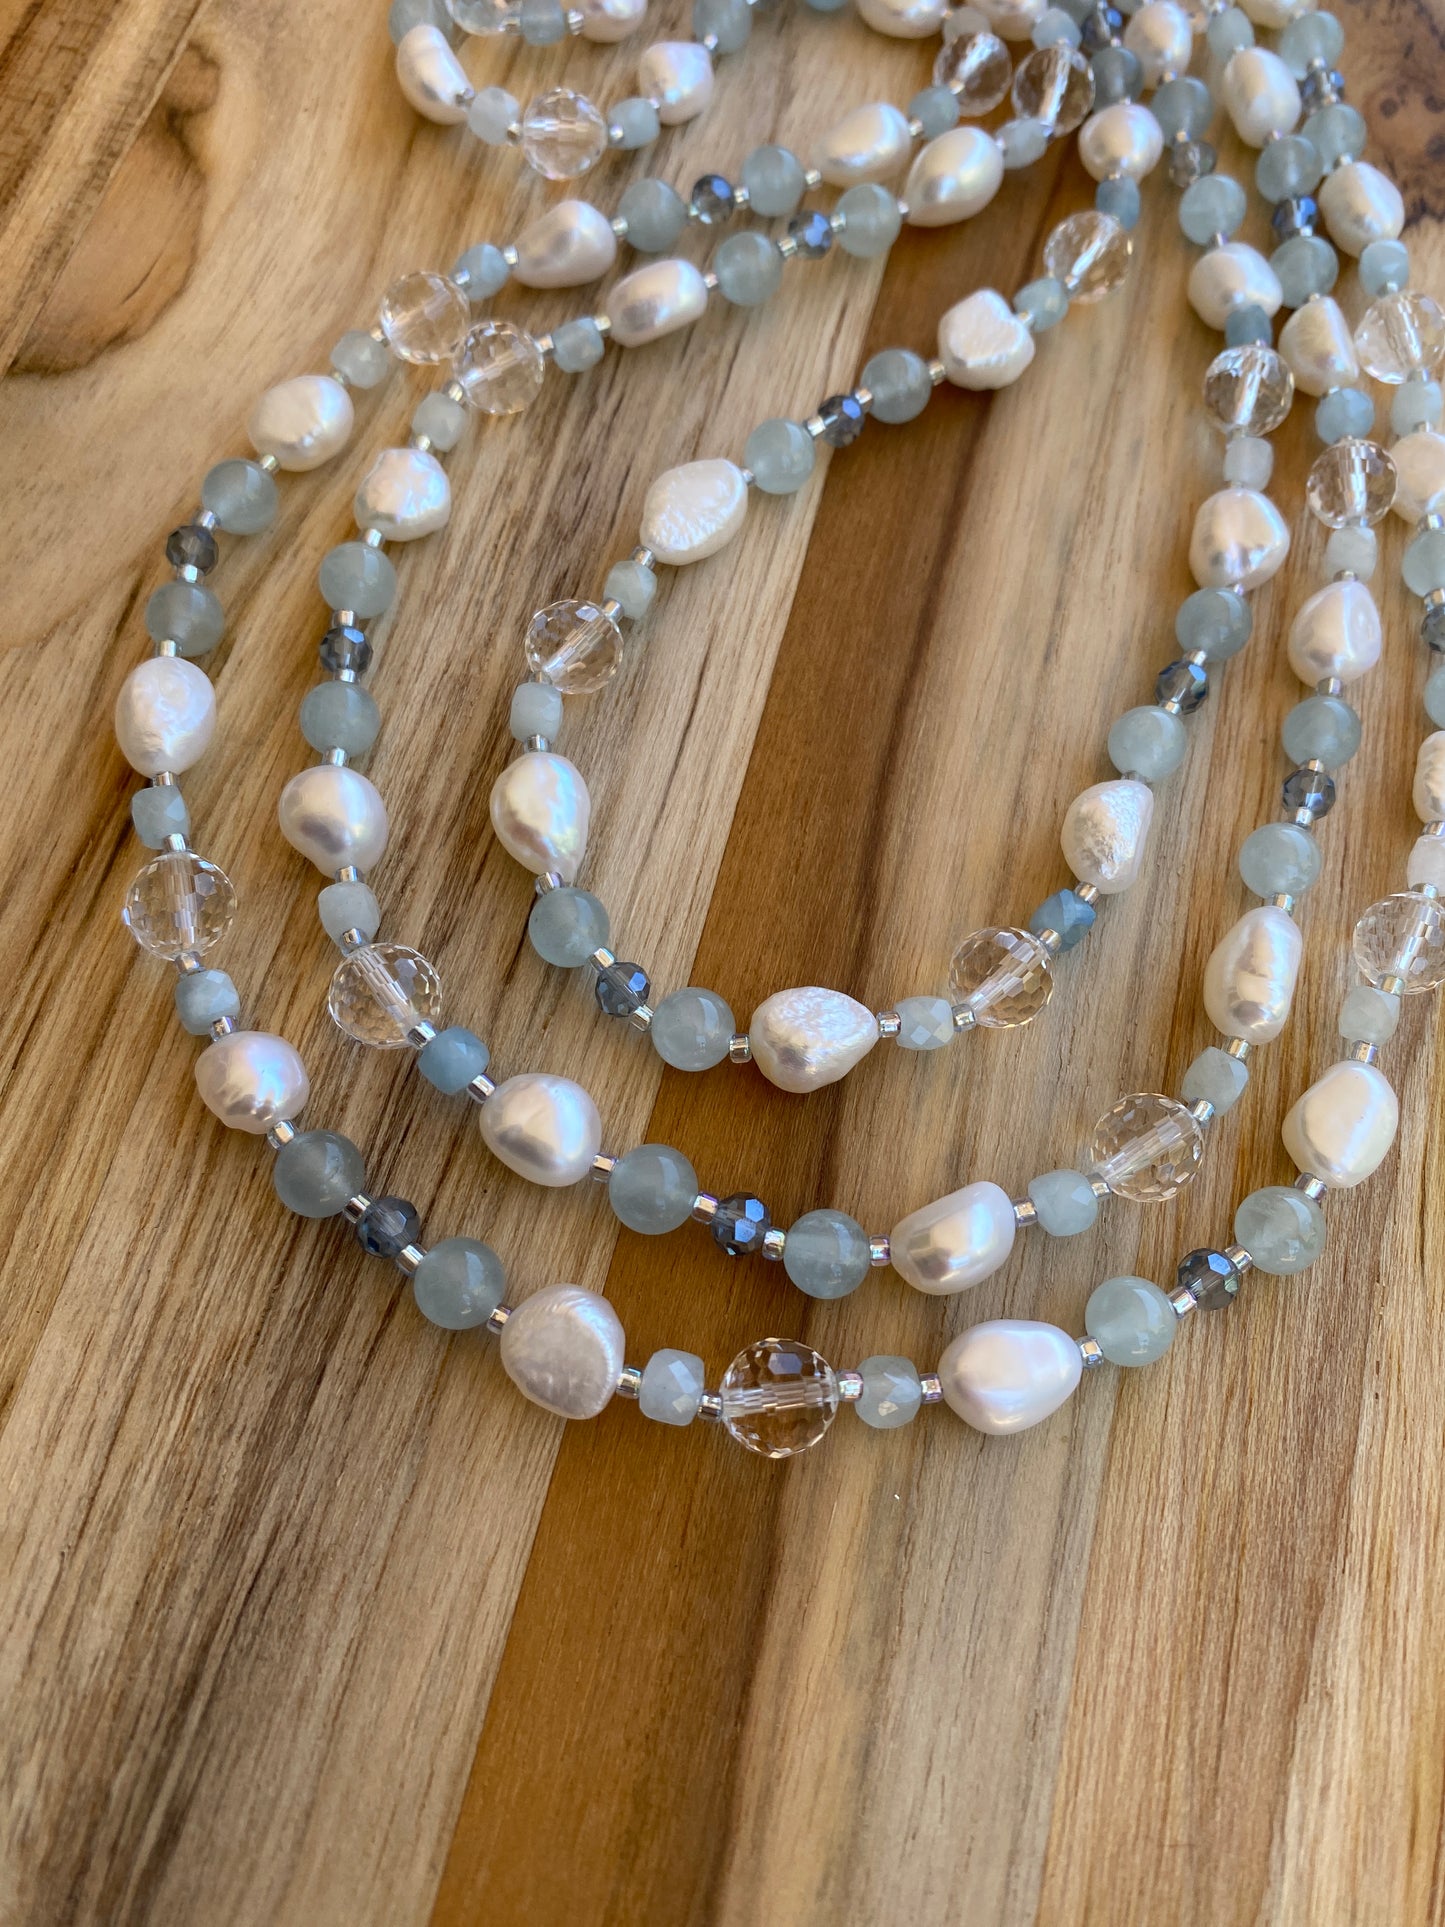 60" Extra Long Wraparound Style Necklace with Clear Quartz Aquamarine and White Baroque Pearls - My Urban Gems